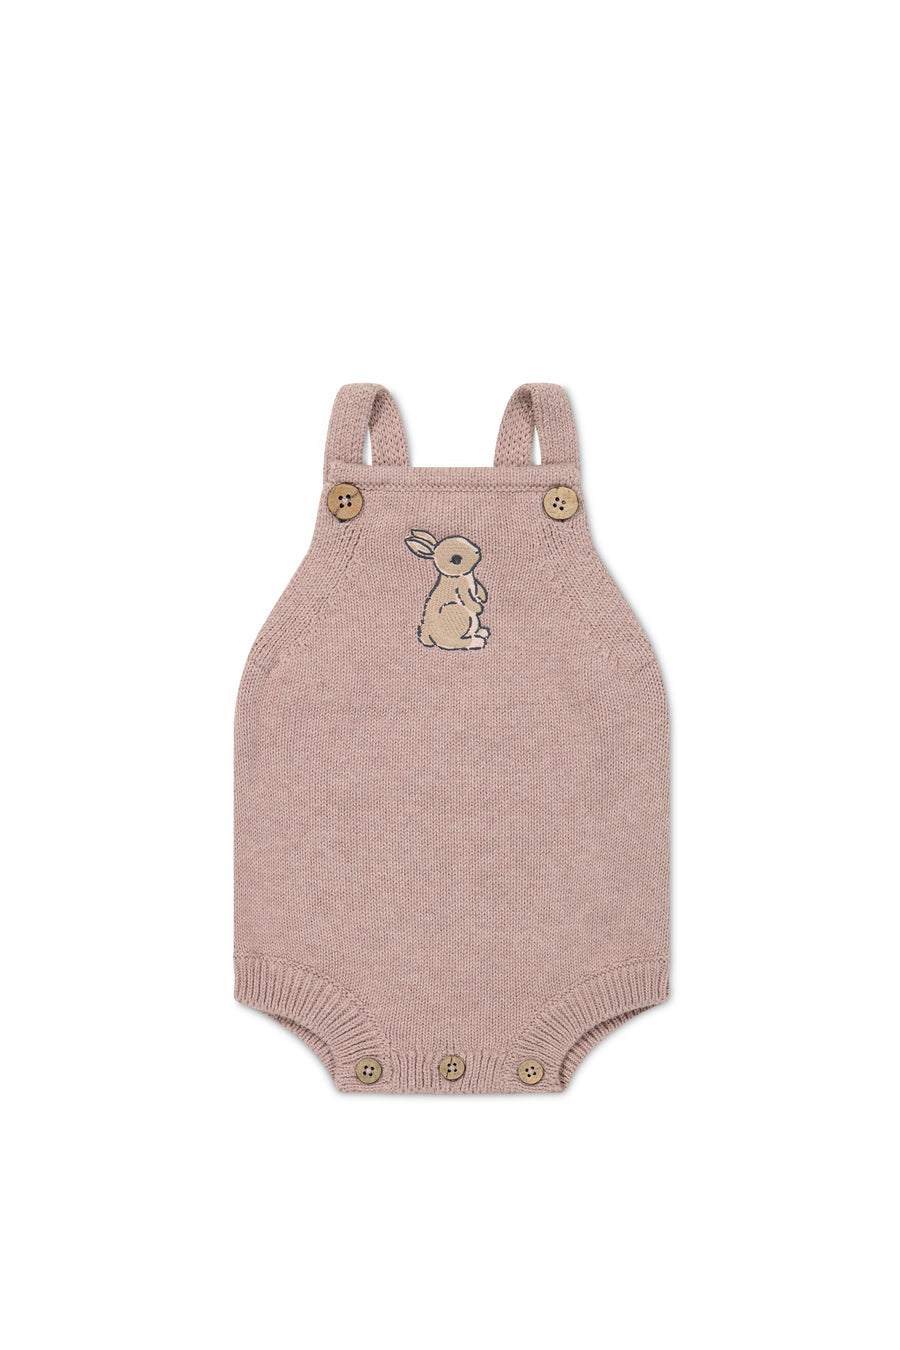 Ginny Playsuit - Shell Marle Childrens Playsuit from Jamie Kay NZ